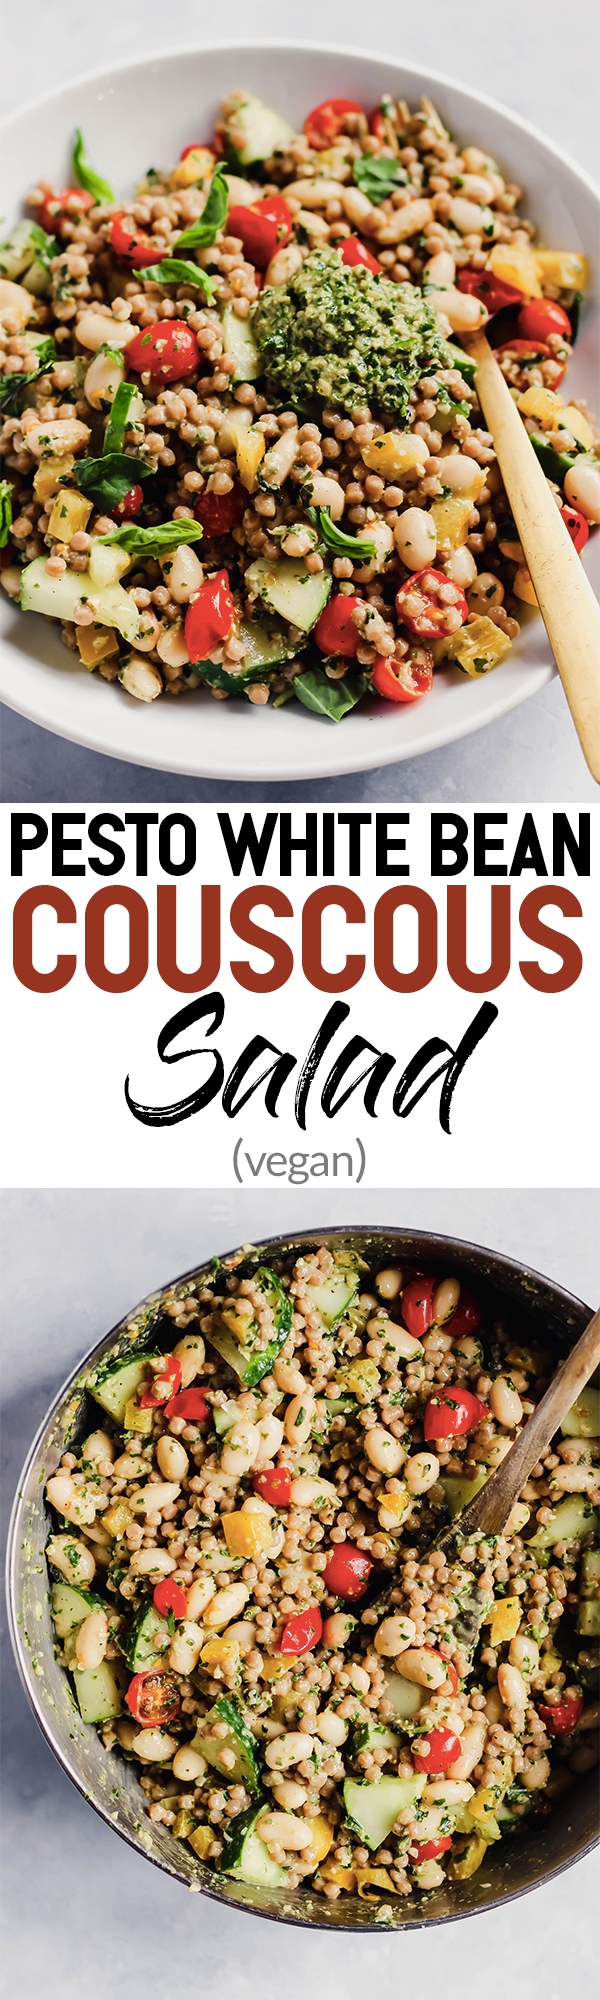 Whip up this colorful Pesto Couscous Salad for an easy lunch or dinner packed with fresh vegetables, whole grains and beans. It’s done in under 30 minutes! (vegan)